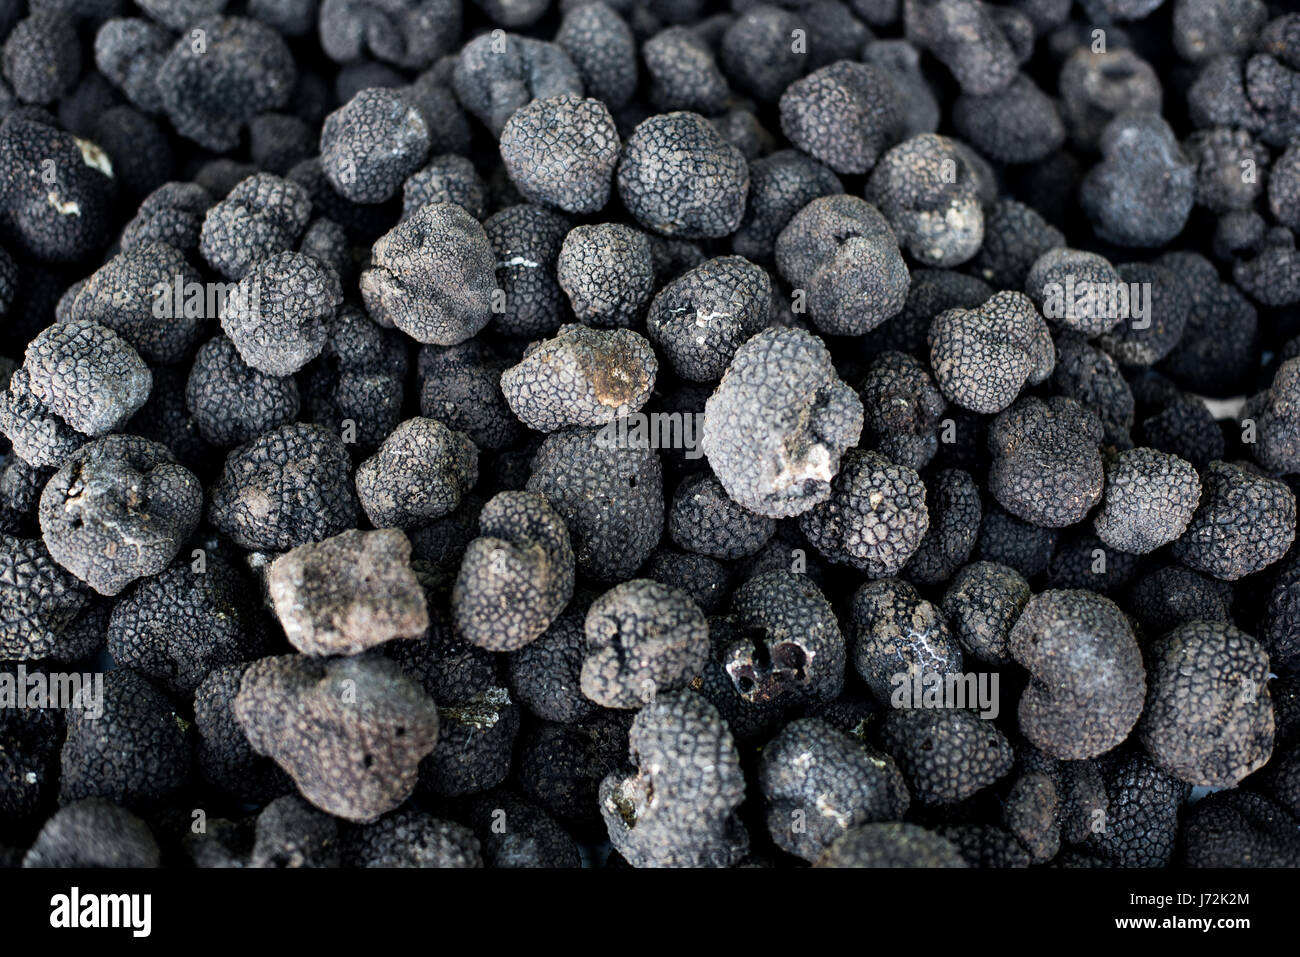 View from the top of many black truffle gourmet mushrooms Stock Photo